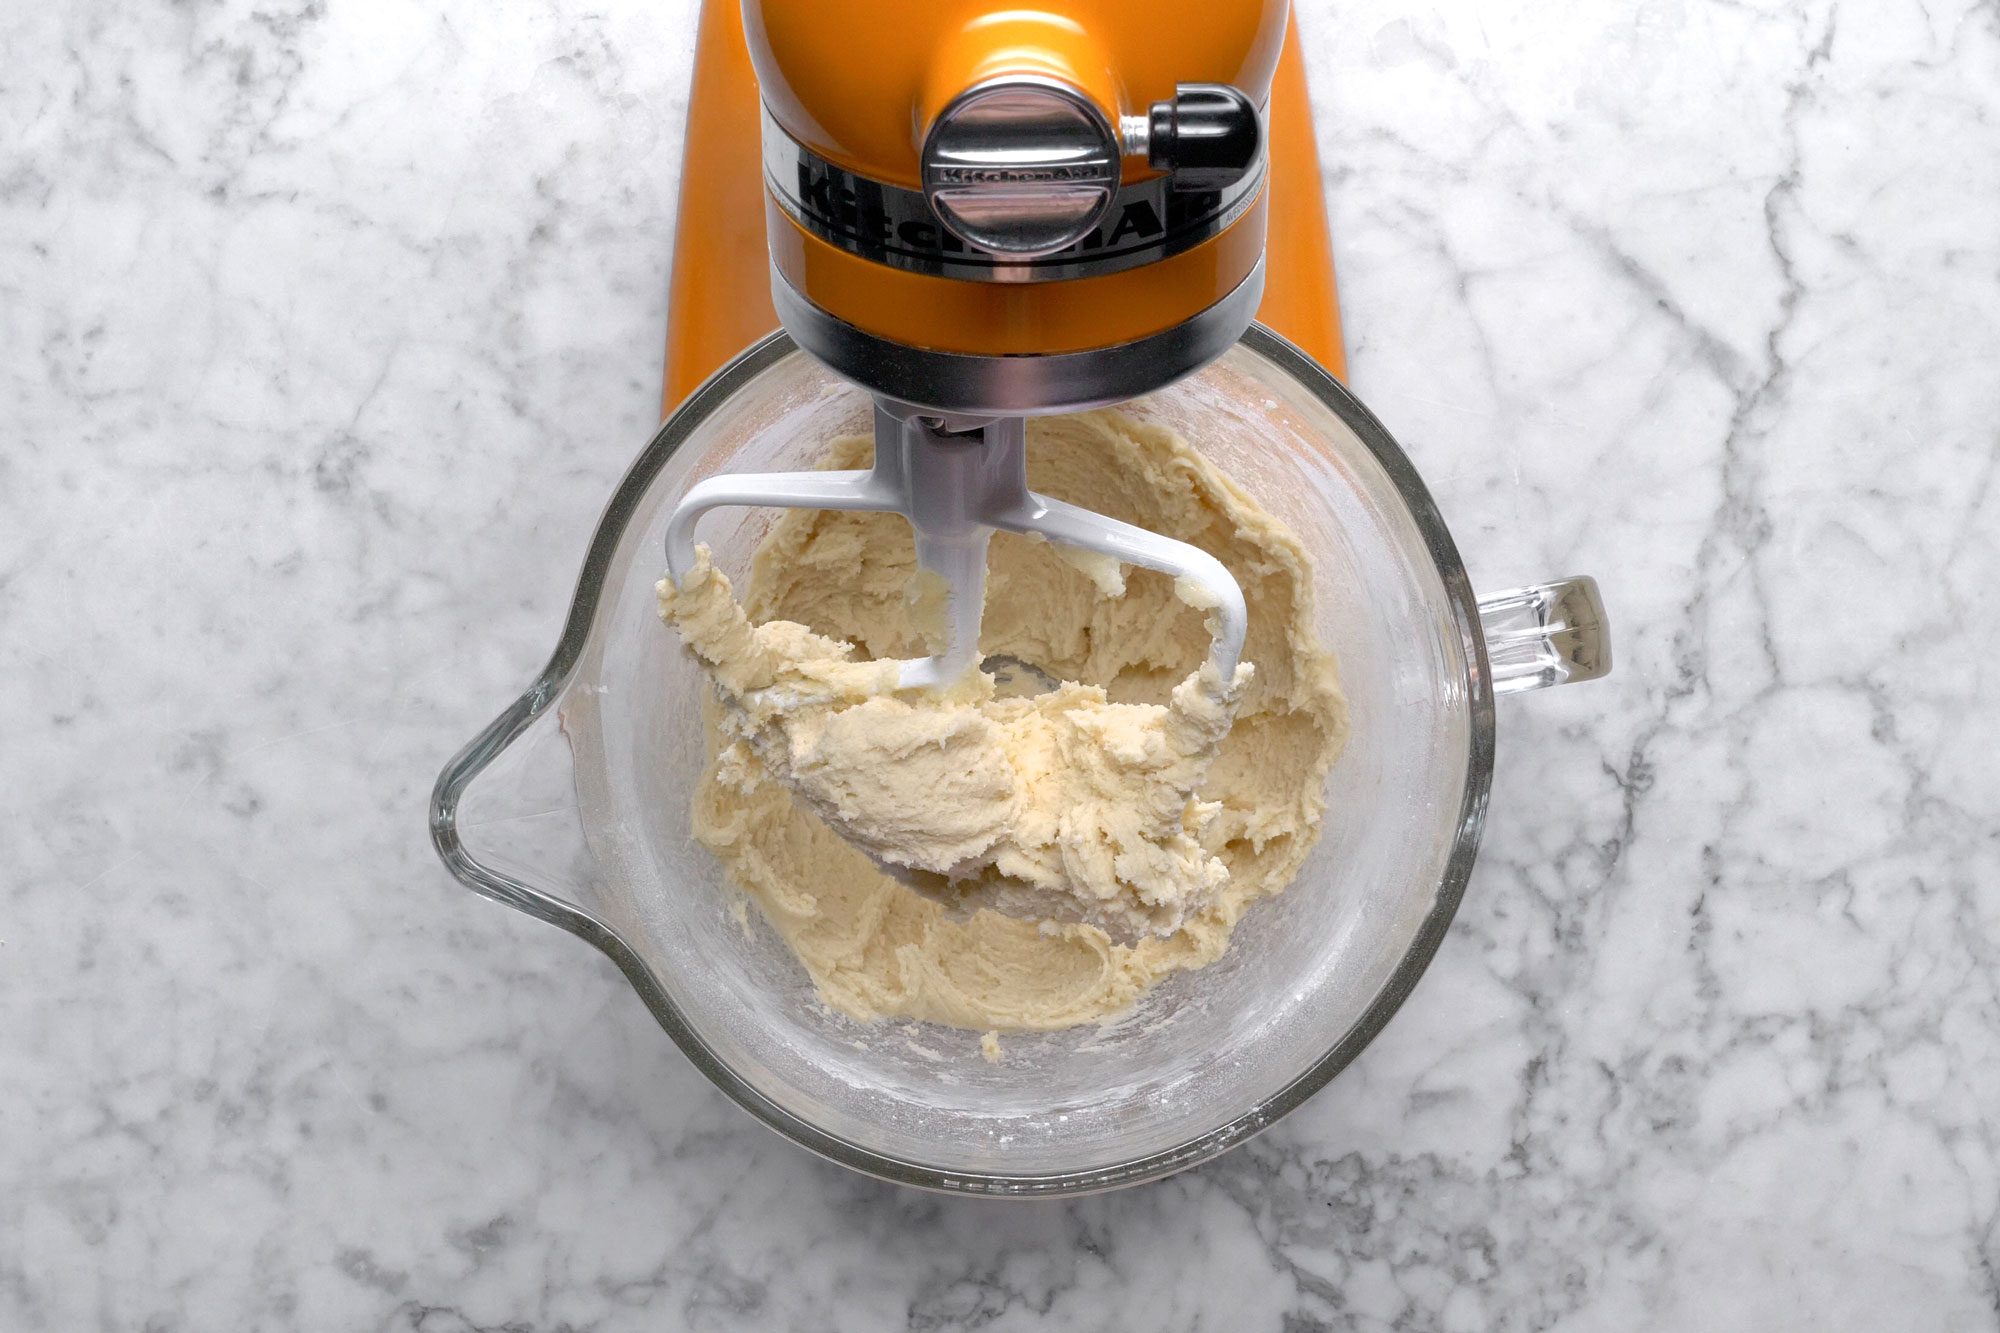 Whisk together the all-purpose flour, baking powder and salt